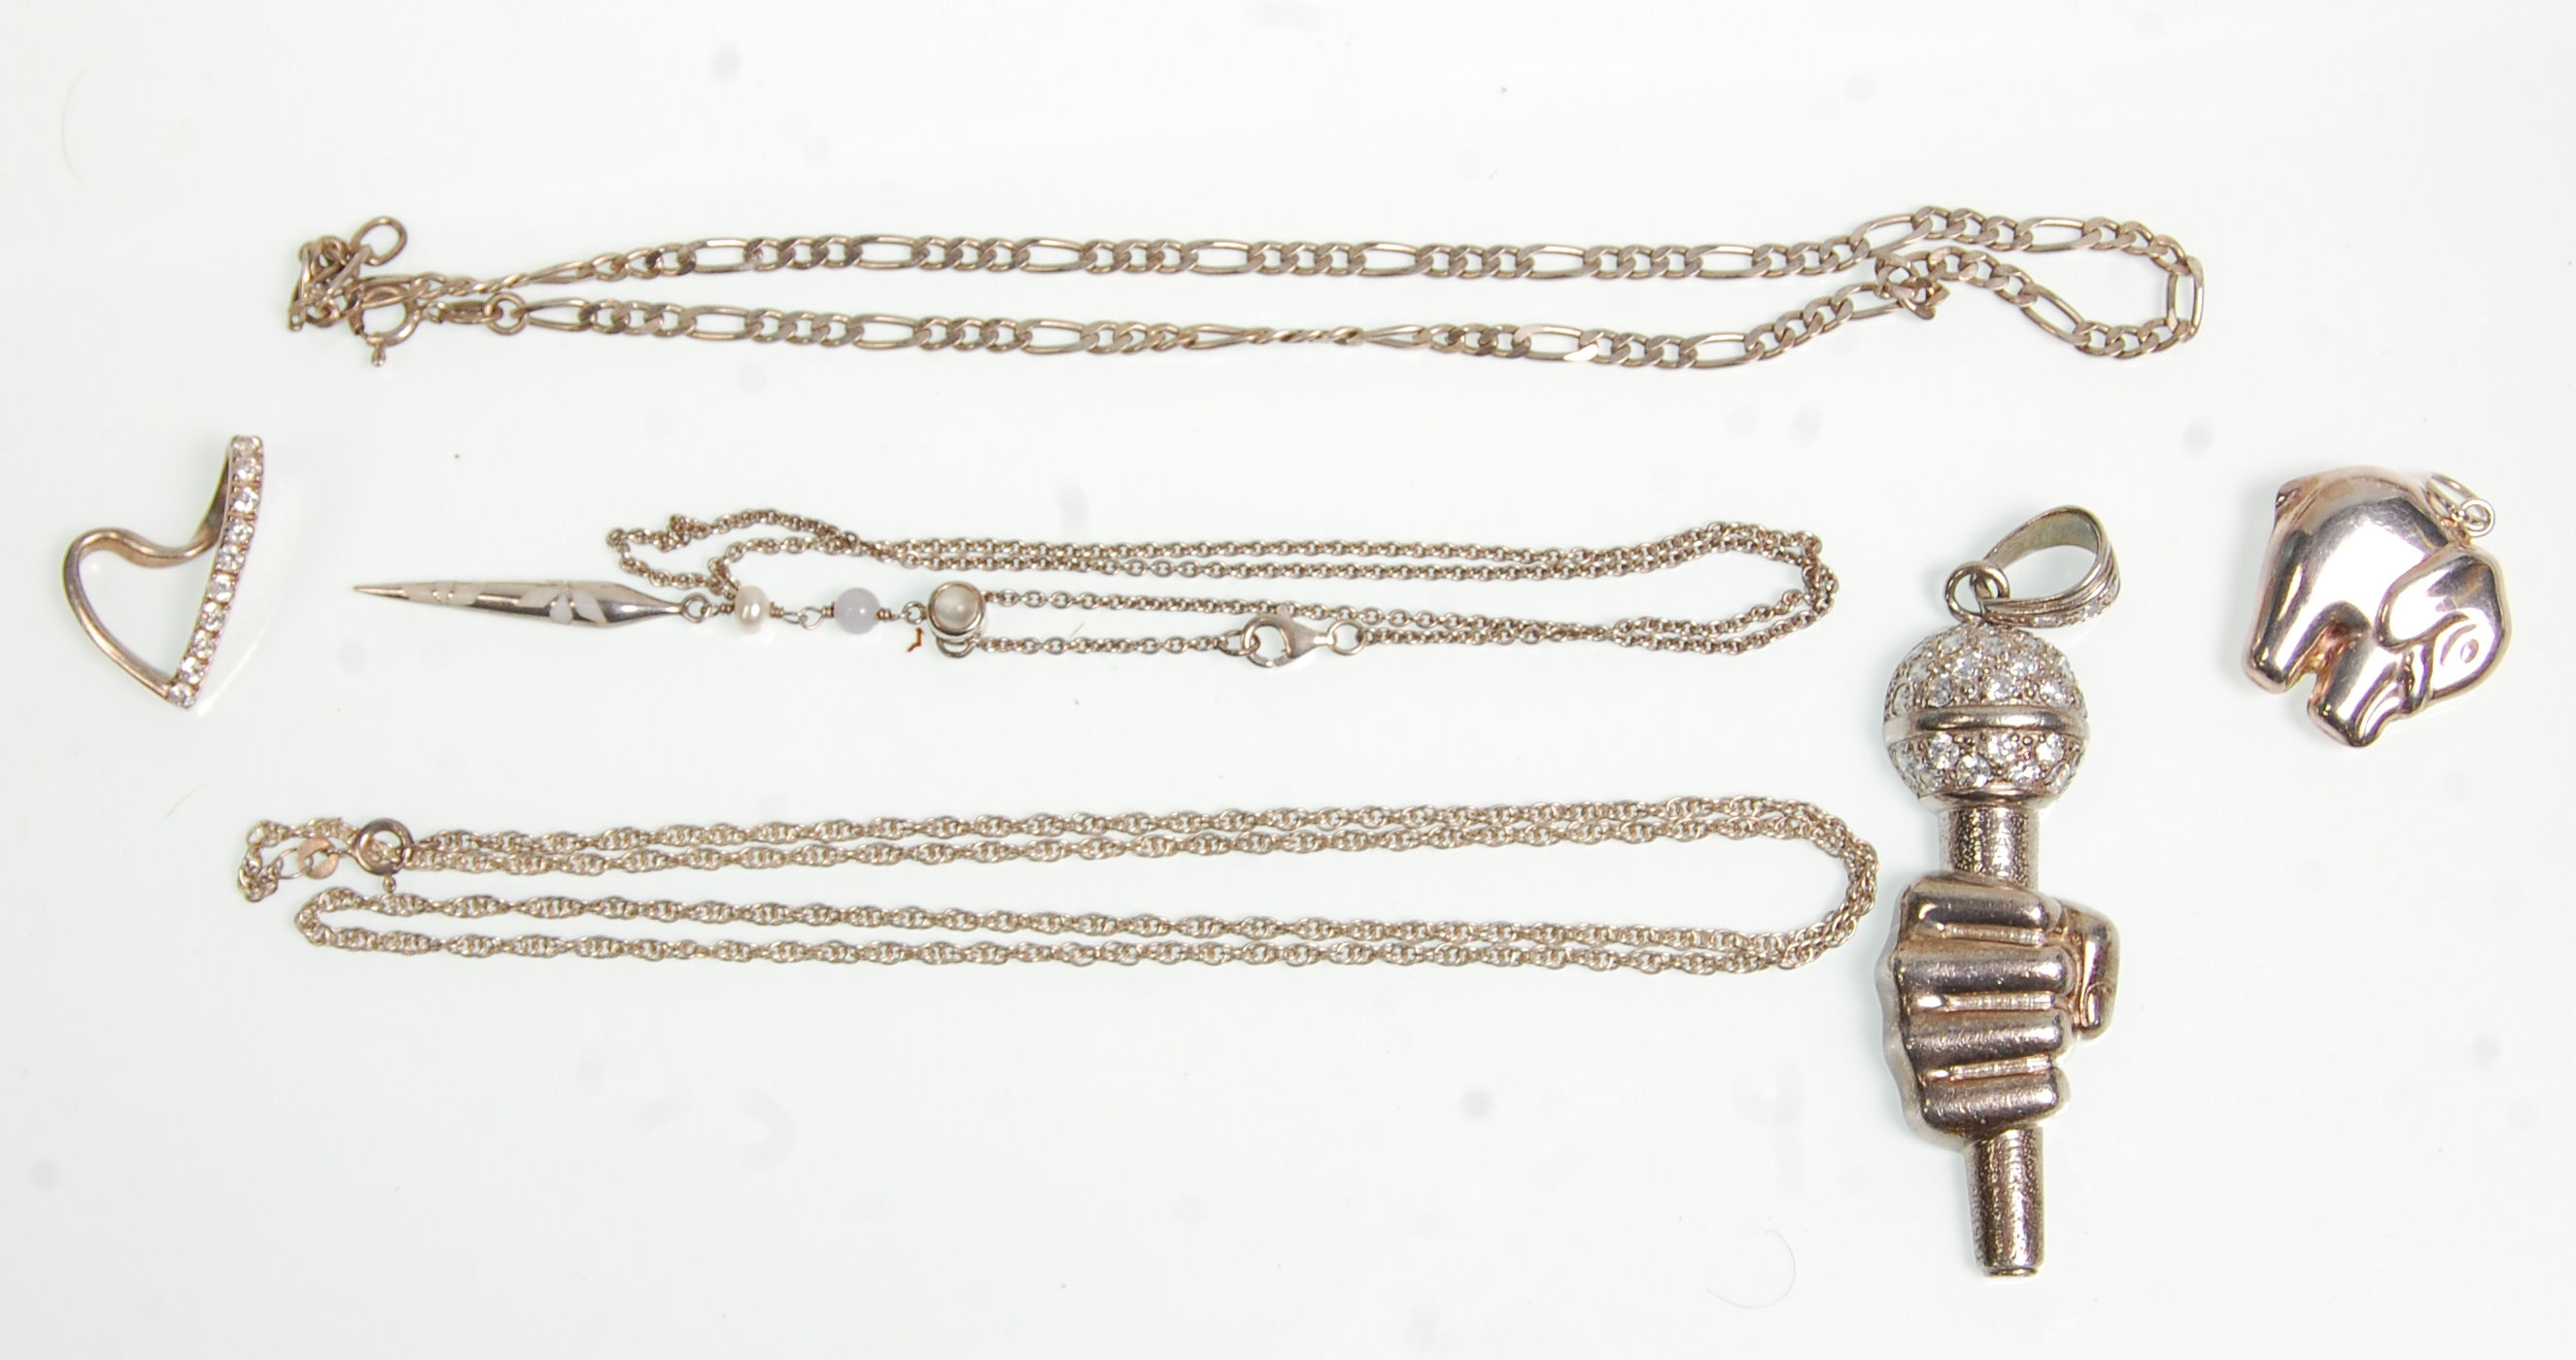 A group of silver chains and pendants to include a large pendant in the form of a hand holding a